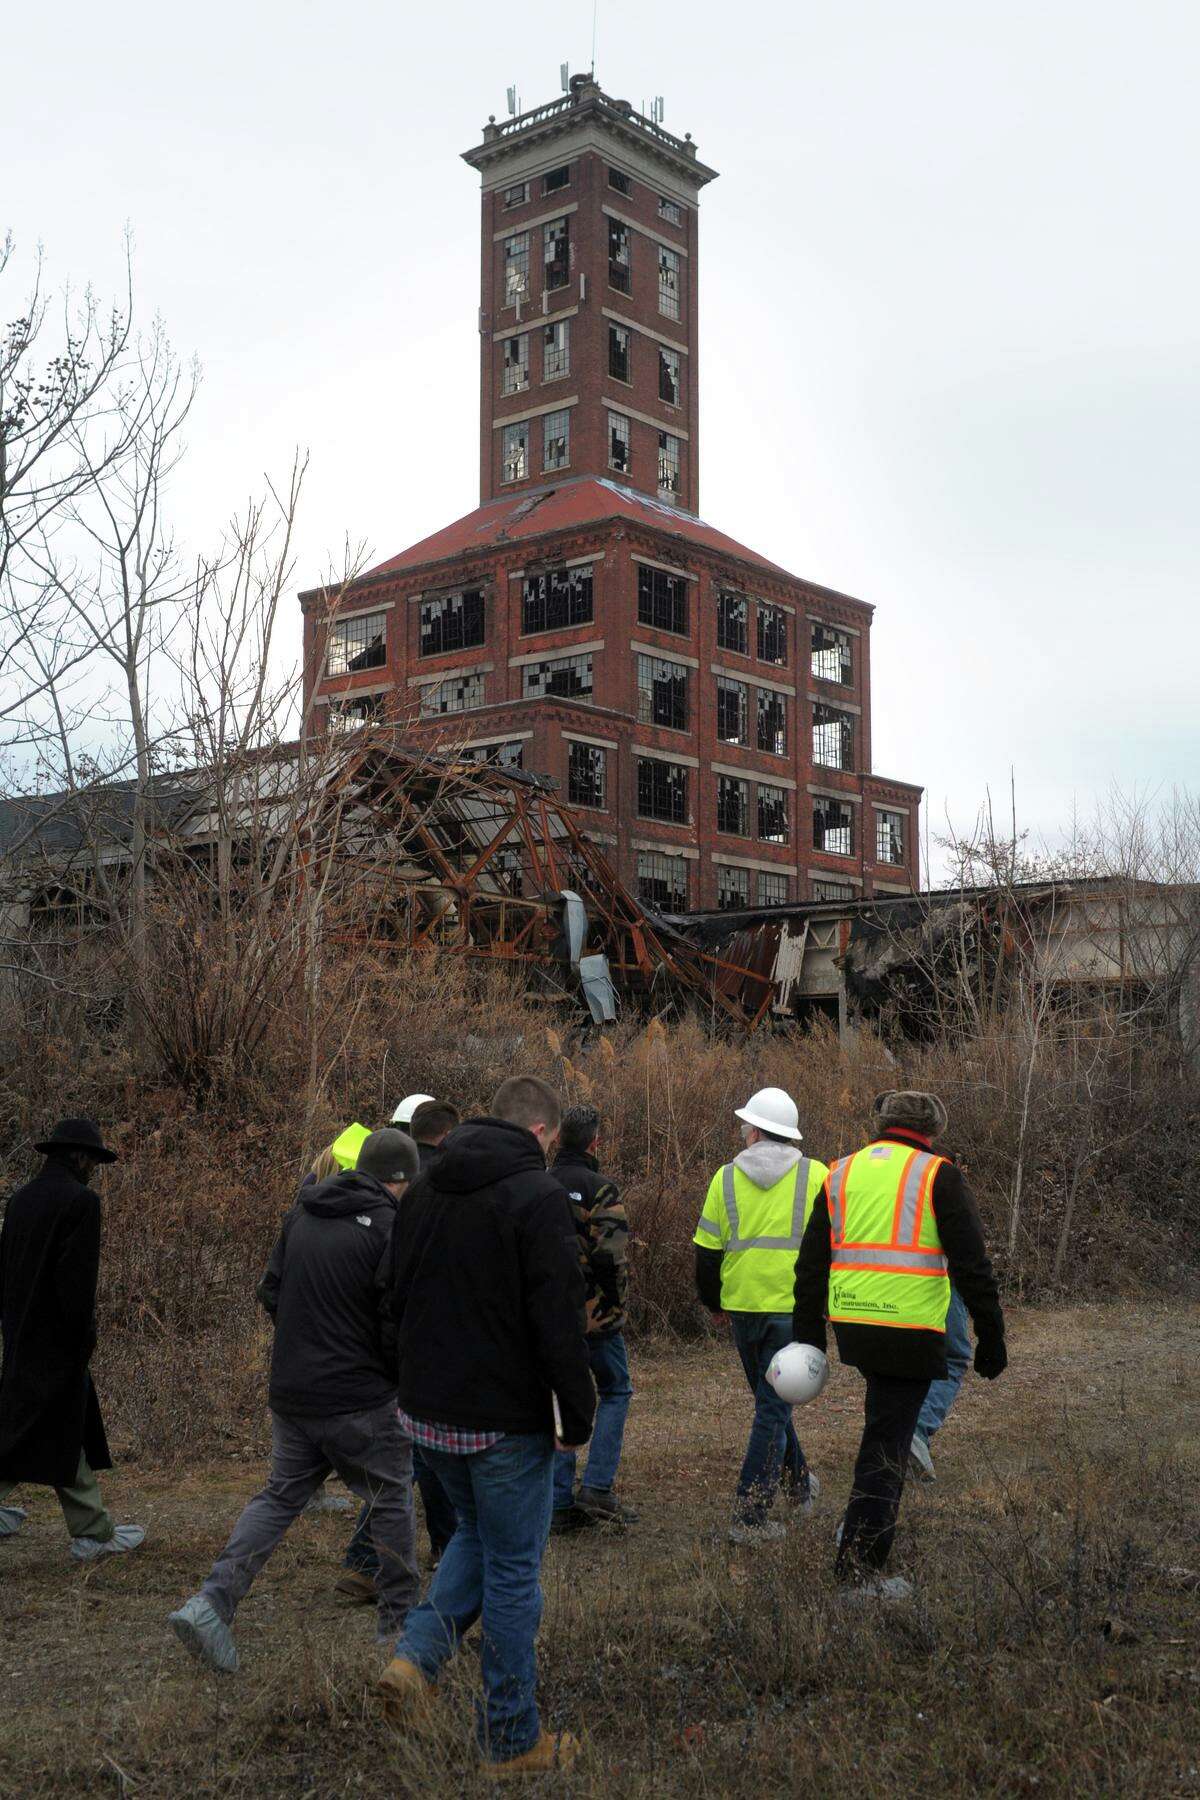 The City of Bridgeport’s Office of Planning and Economic Development lead a tour of the Remington Arms Shot Tower for a group of environmental and engineering contractors in Bridgeport, Conn. Jan. 5, 2020. The tour was the first step in plans to help secure the abandoned and deteriorating industrial tower, which was built in 1909.